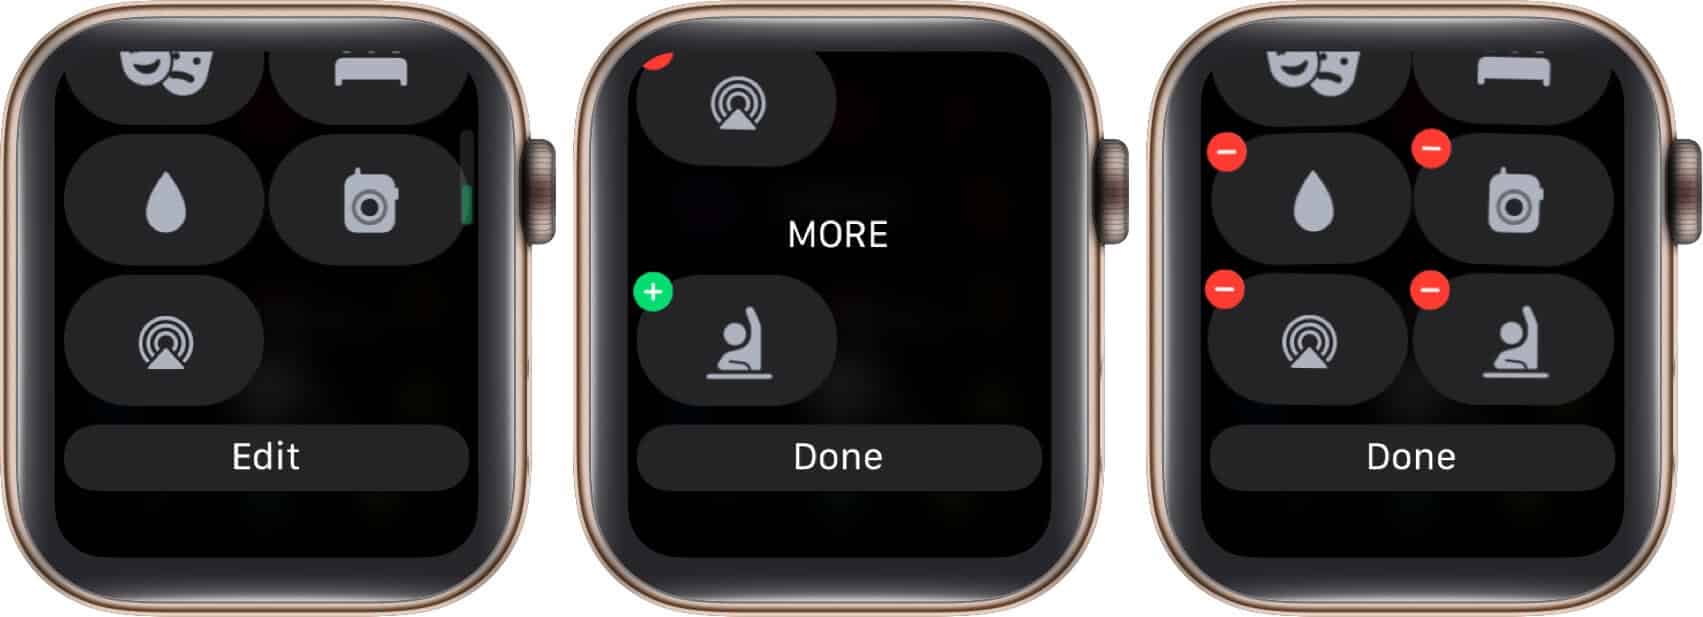 open control center tap on schooltime icon and then tap on done on apple watch